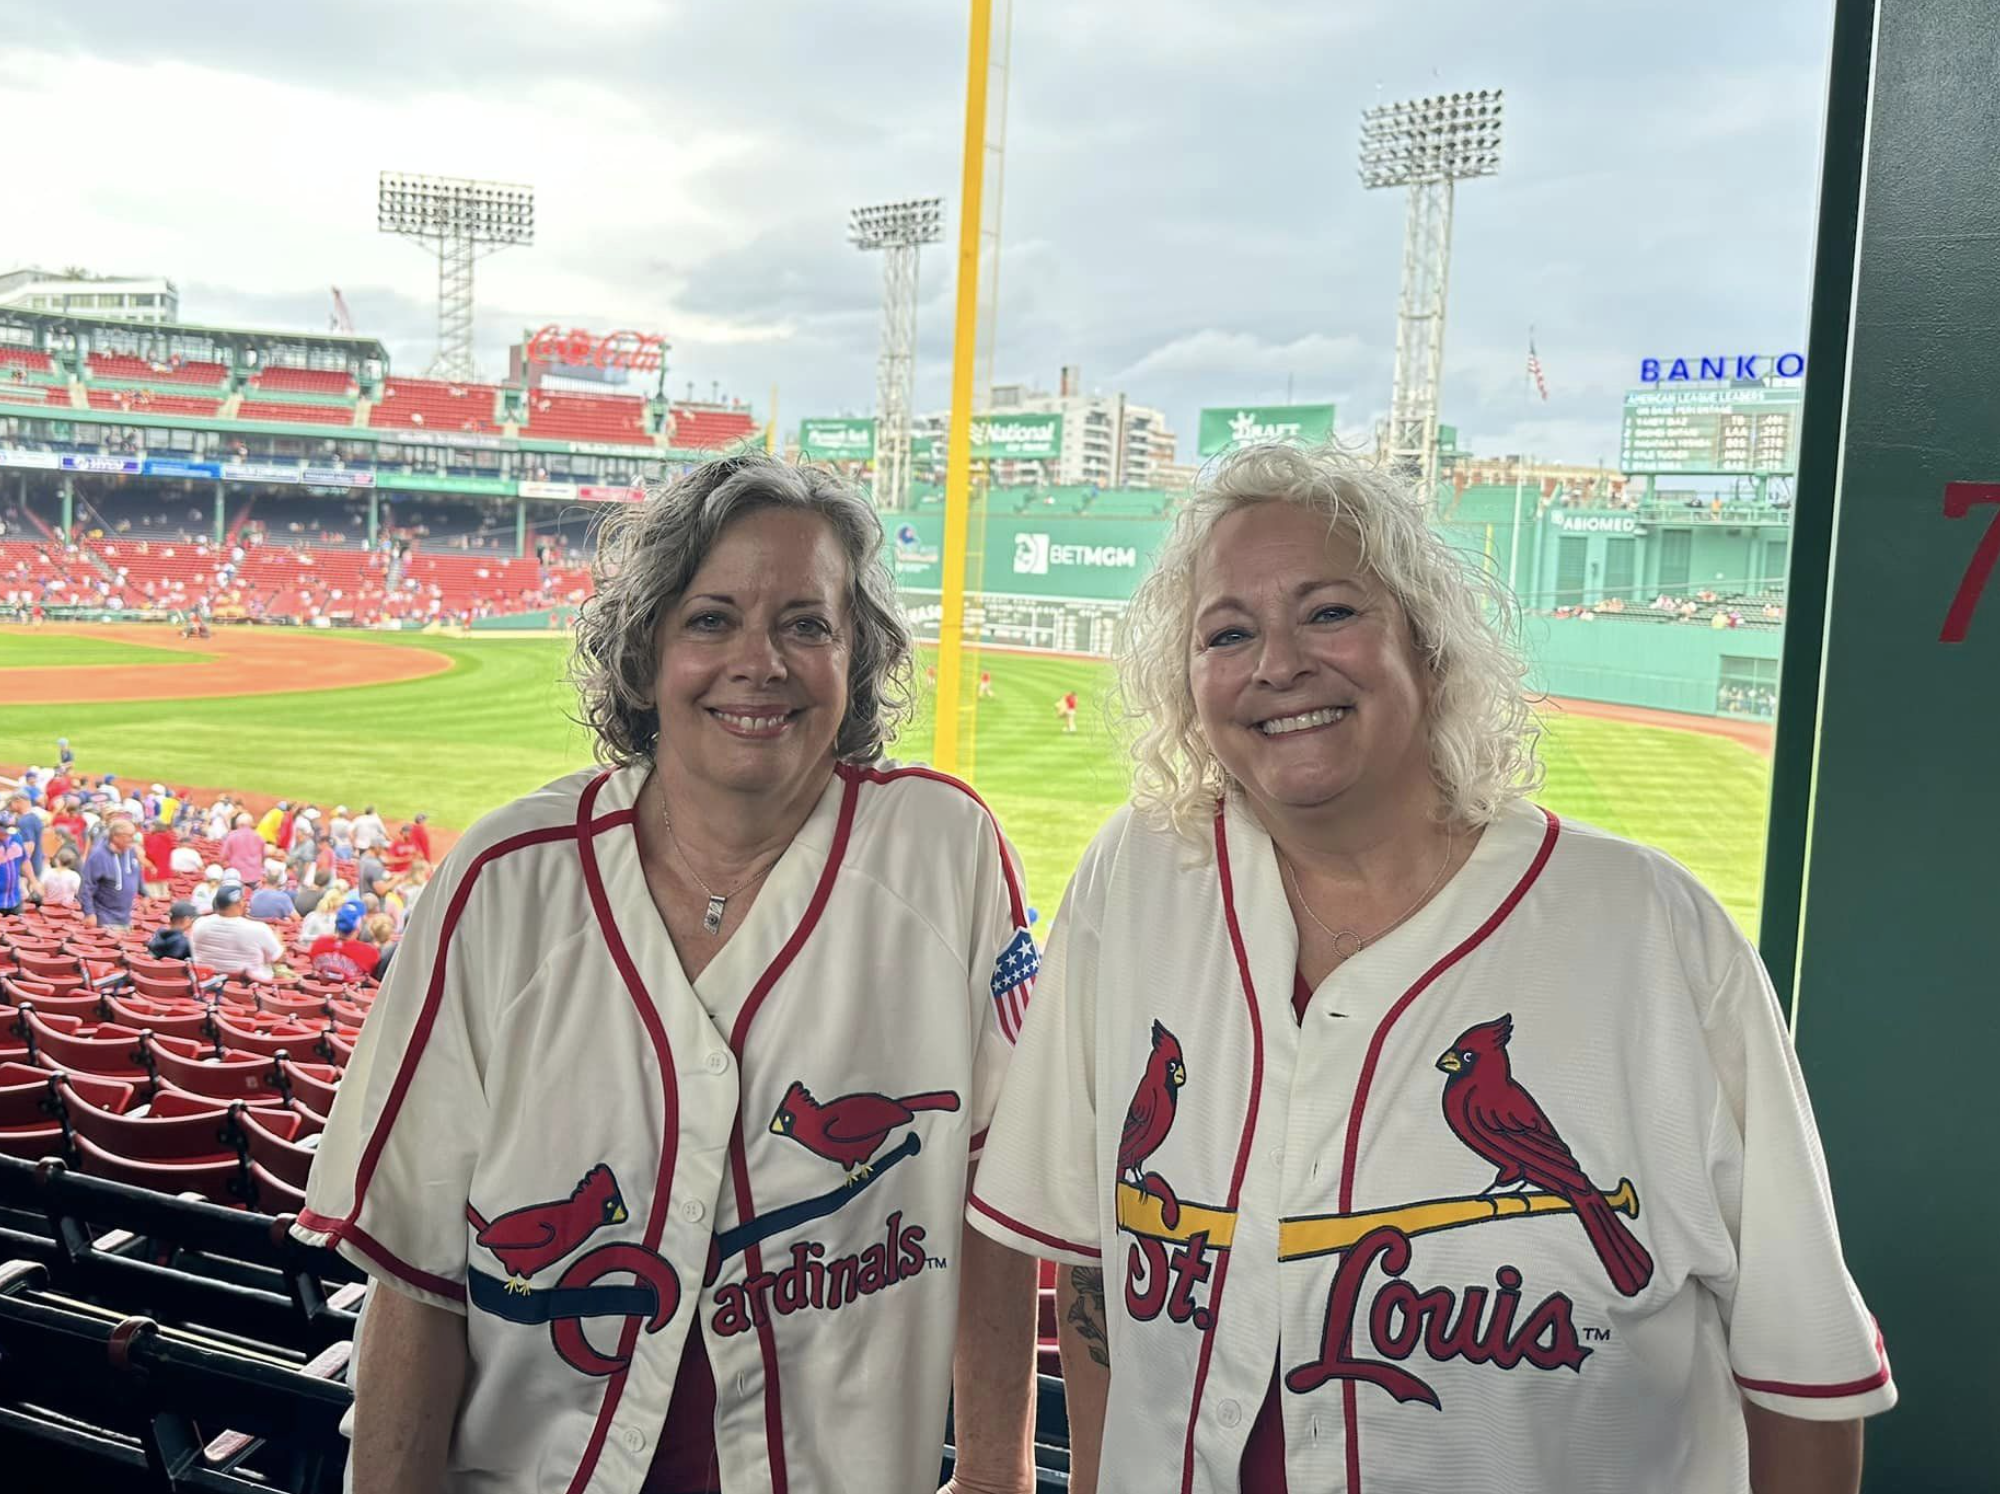 Cardinals Fan Spotlight: They celebrated their Mets fan brother's